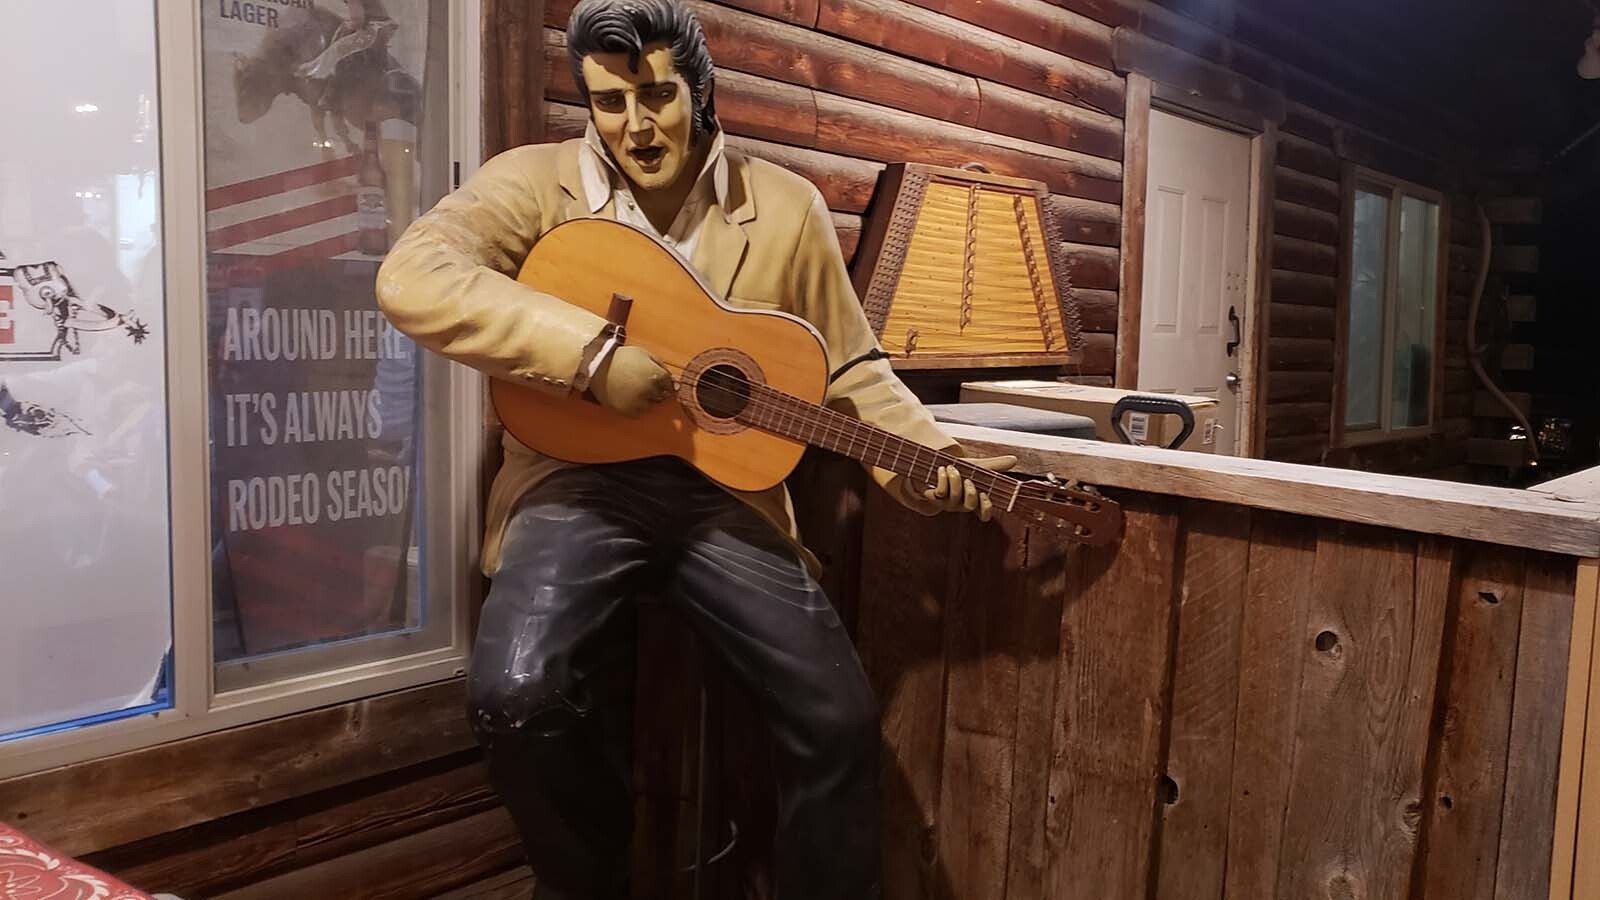 Now you know where Elvis has been hiding all these years — at the Bunkhouse.